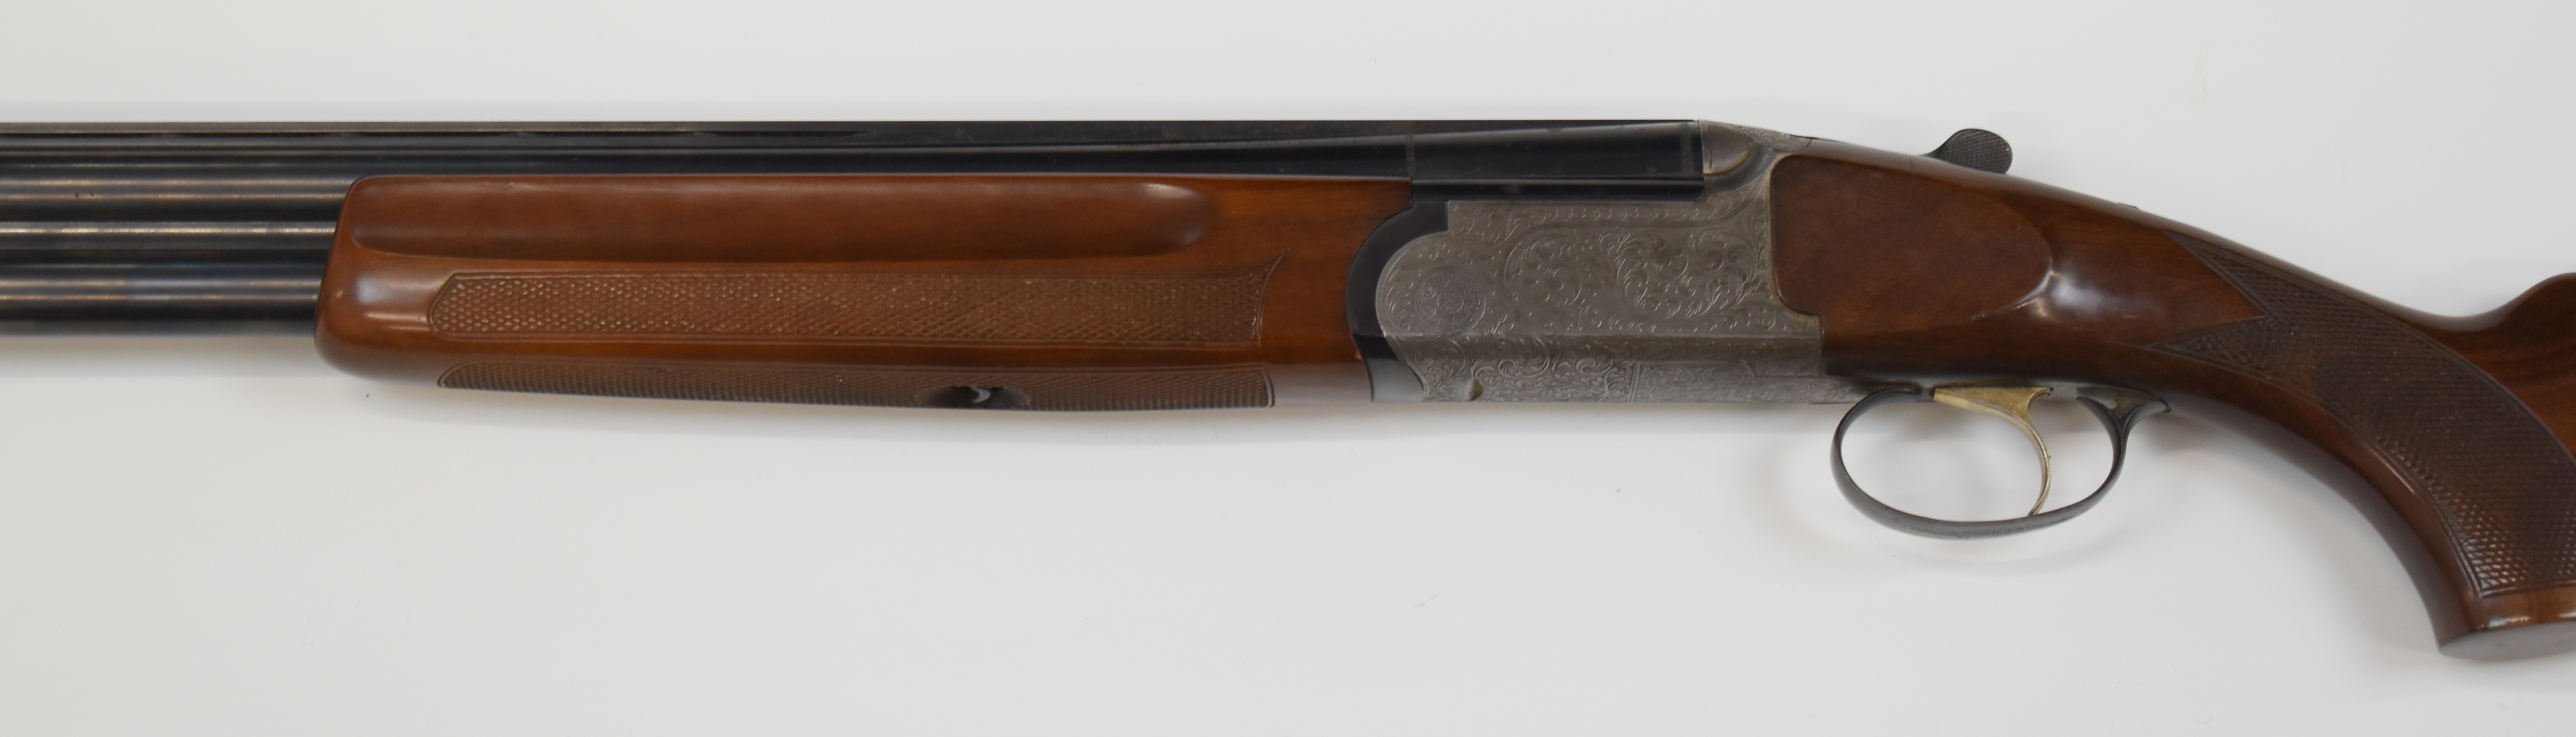 Sabatti 12 bore over under ejector shotgun with engraved lock, underside, top plate, trigger guard - Image 9 of 10